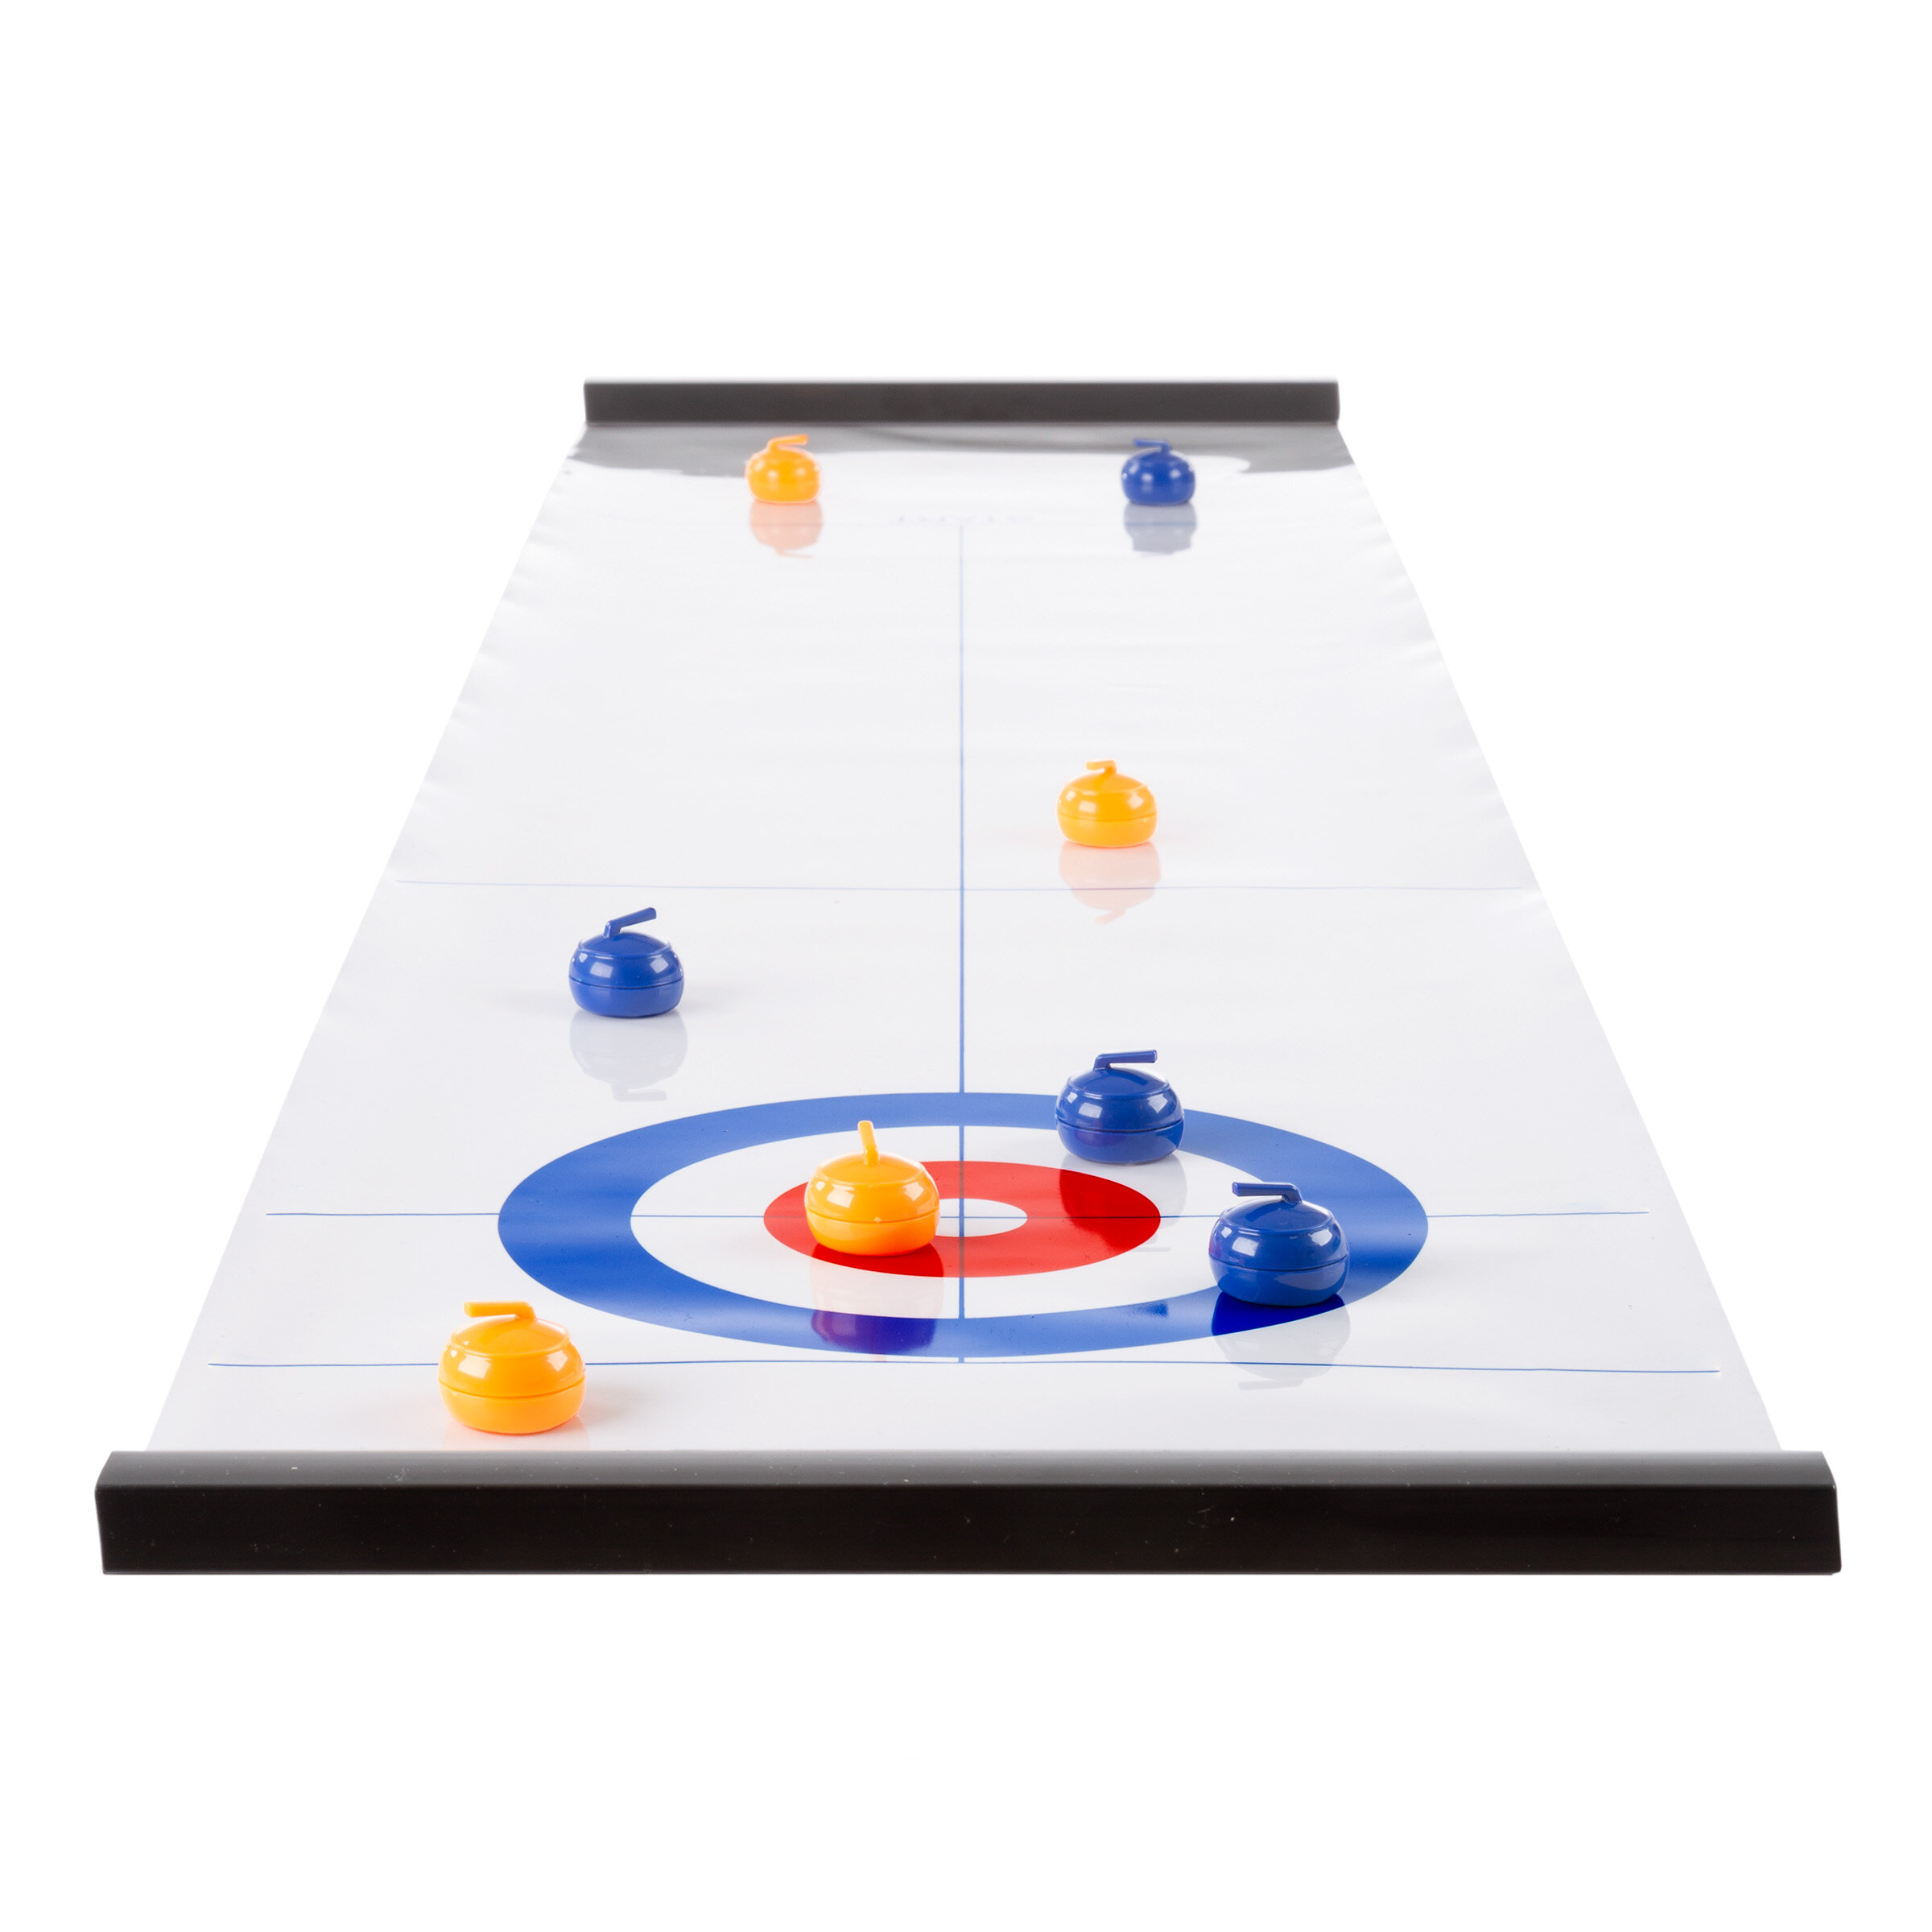 Yobbi Tabletop Curling Game for Kids Play /& Portable. Adults /& Family Easy to Set Up Fun Indoor Sports Game for Everyone Come with 8+2 Tabletop Curling Stones